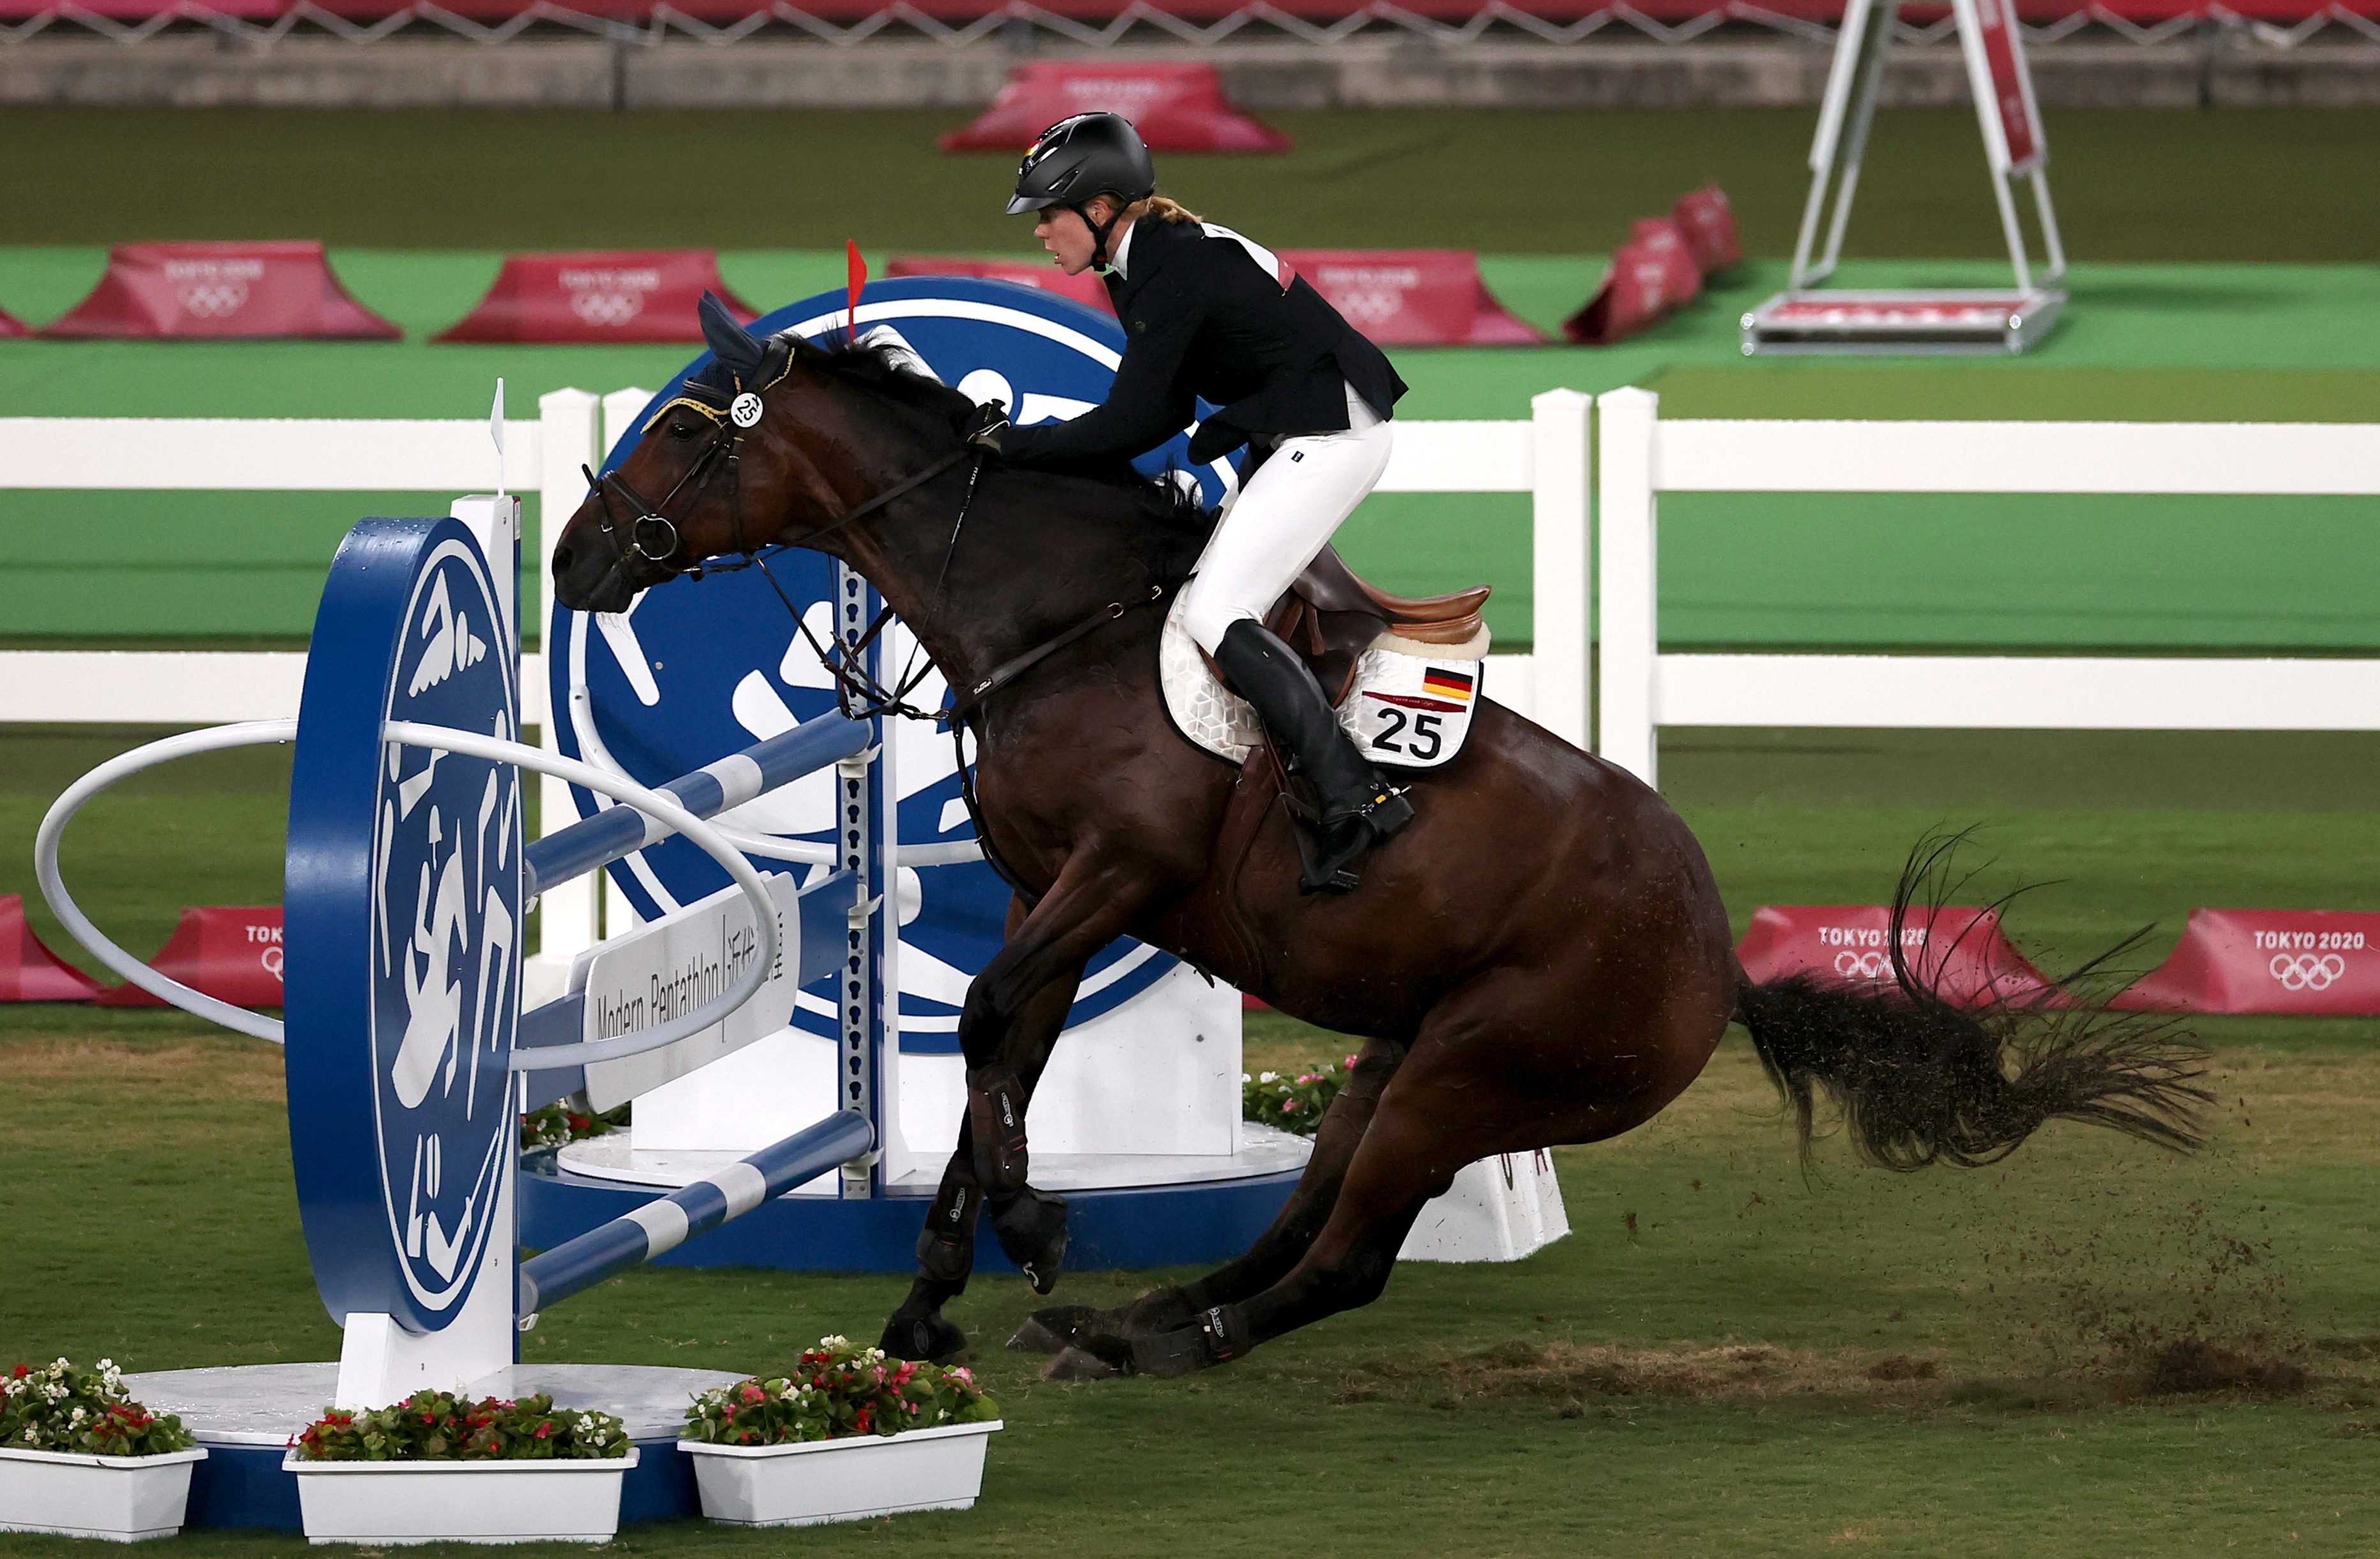 Germany’s modern pentathlon coach disqualified after punching horse